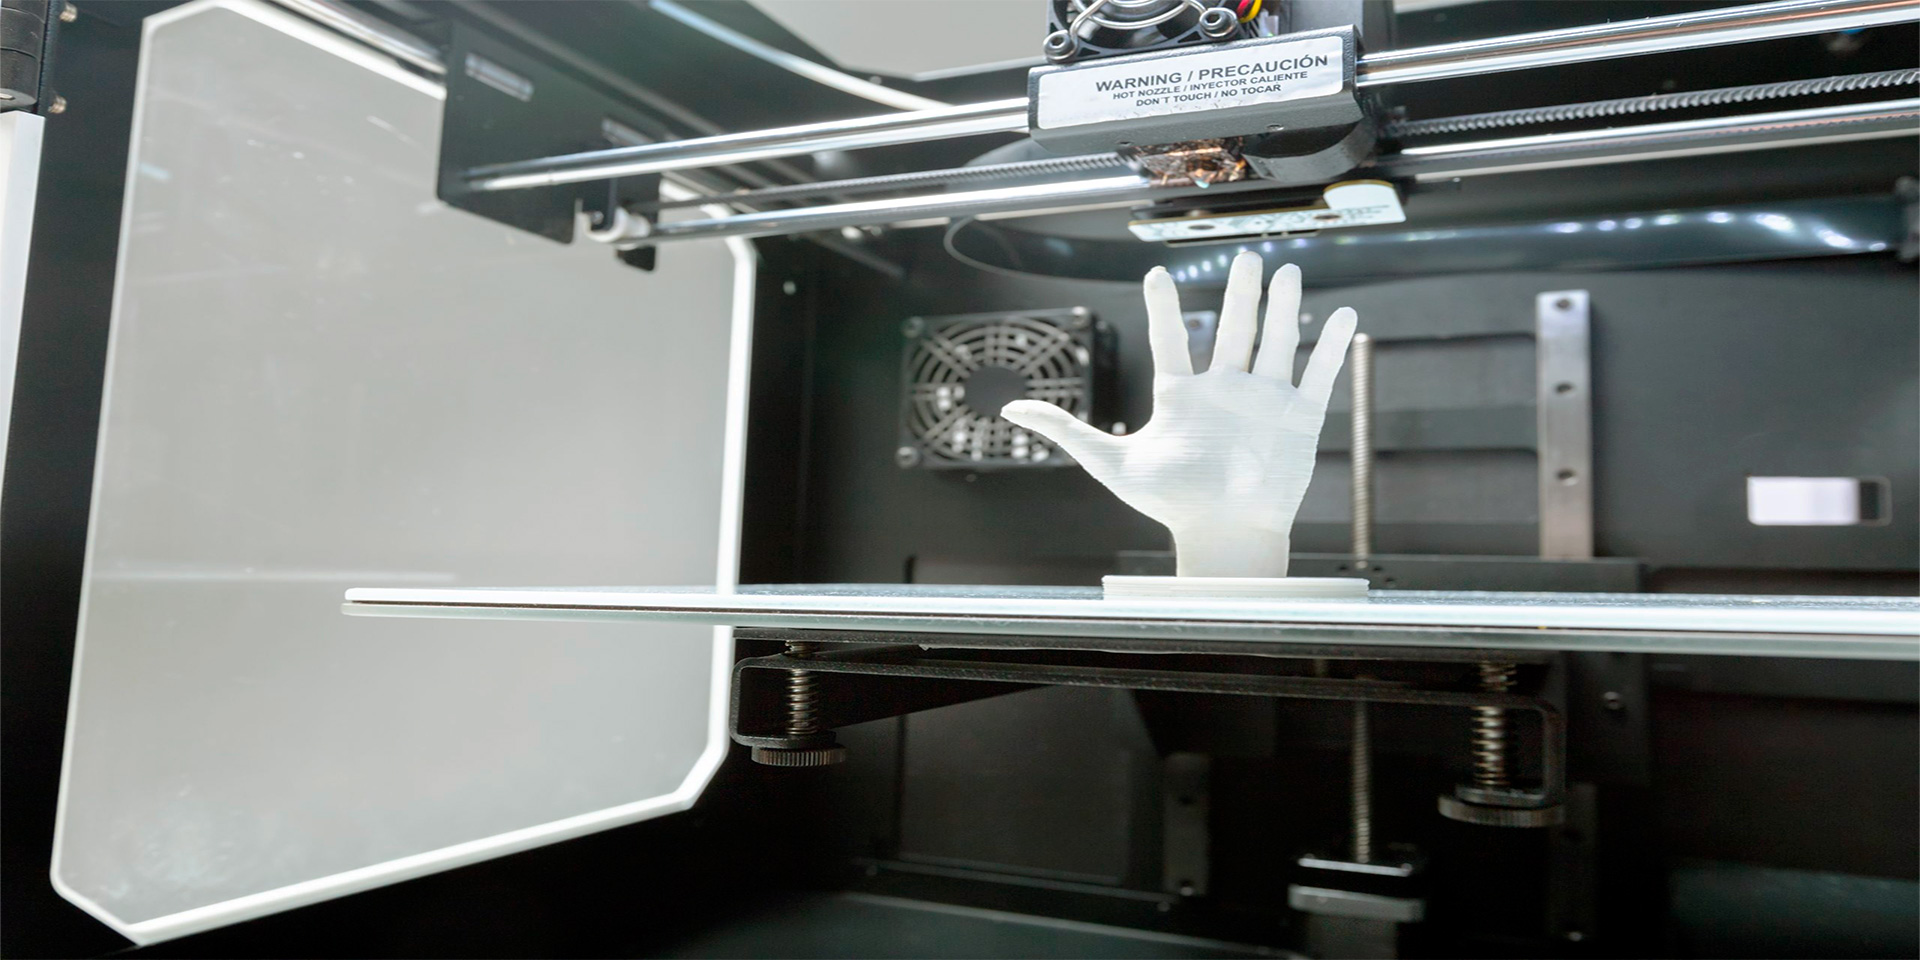 3D Printing in Healthcare